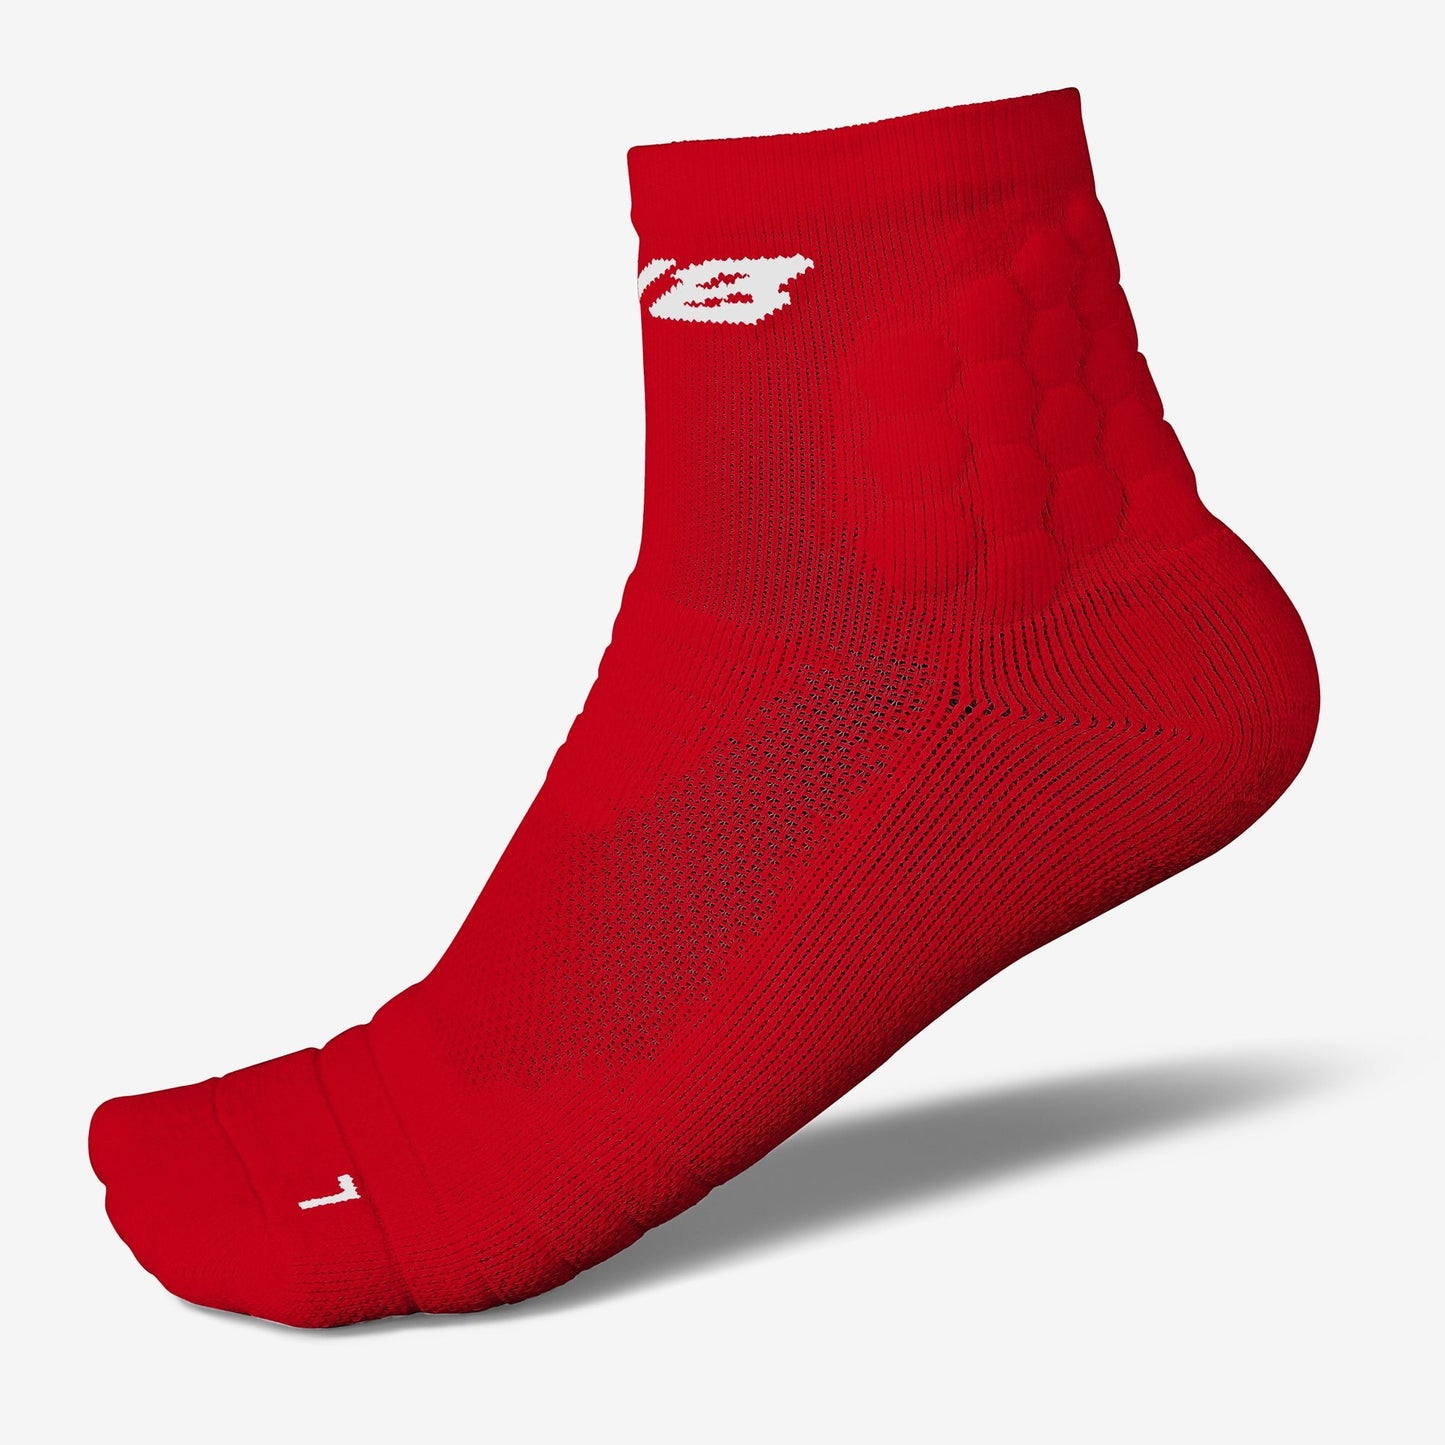 PADDED QTR SOCKS 2.0 (RED) - We Ball Sports